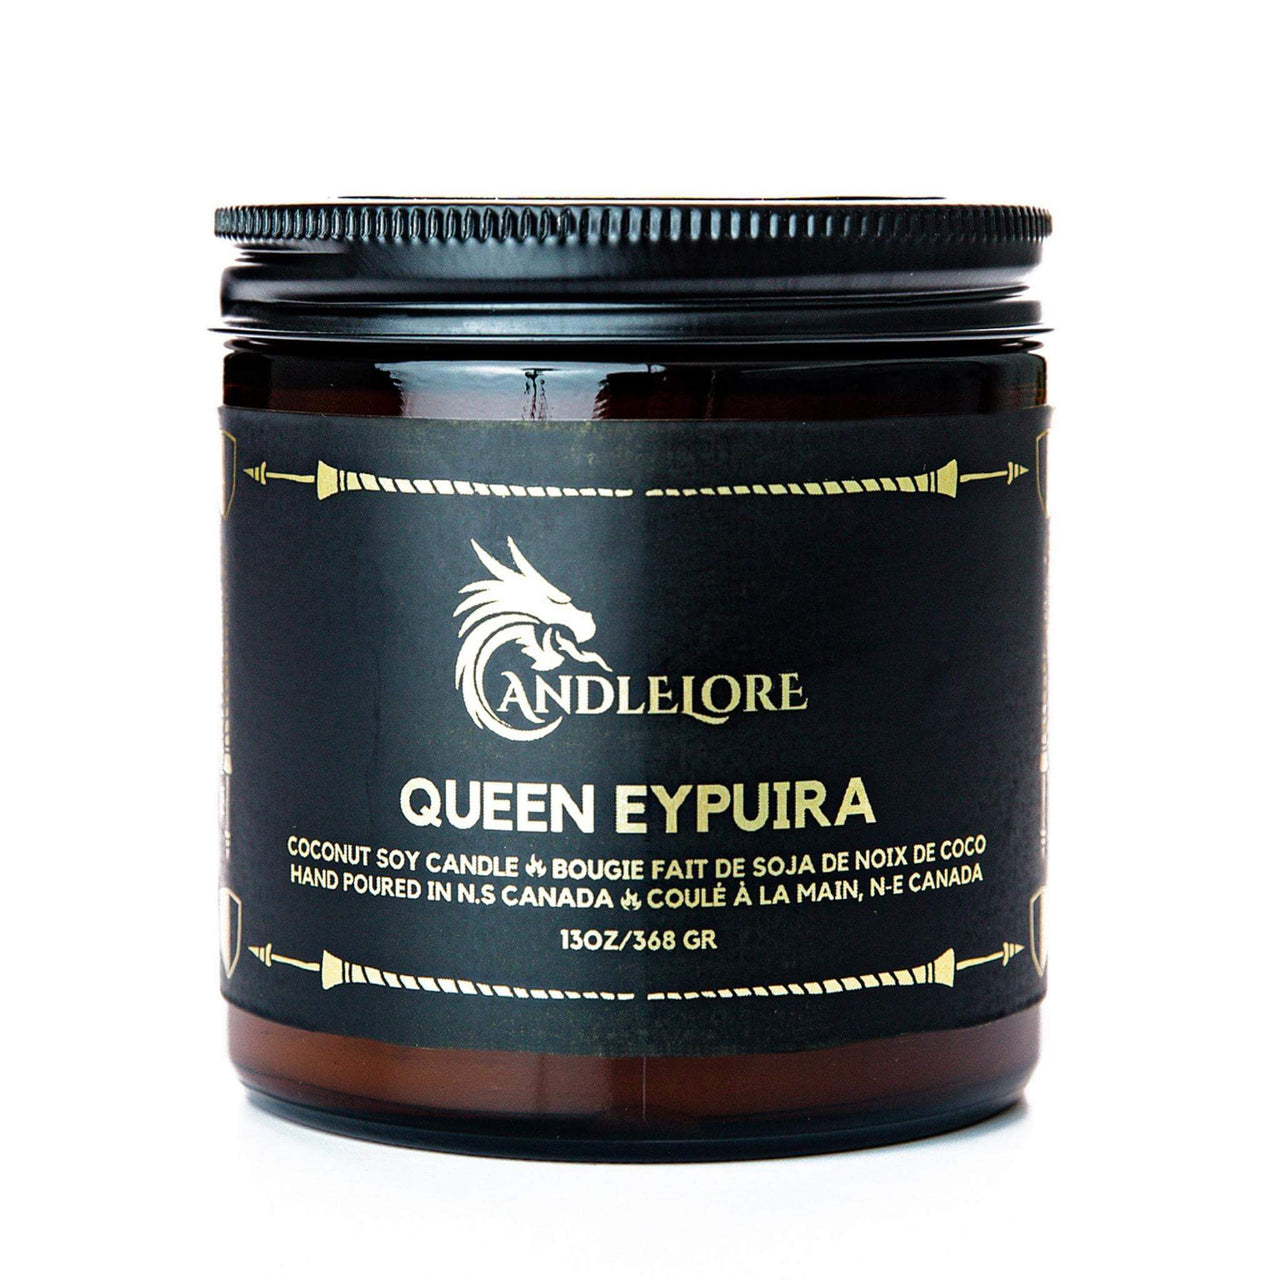 Large Queen Eypuira Candle on white background